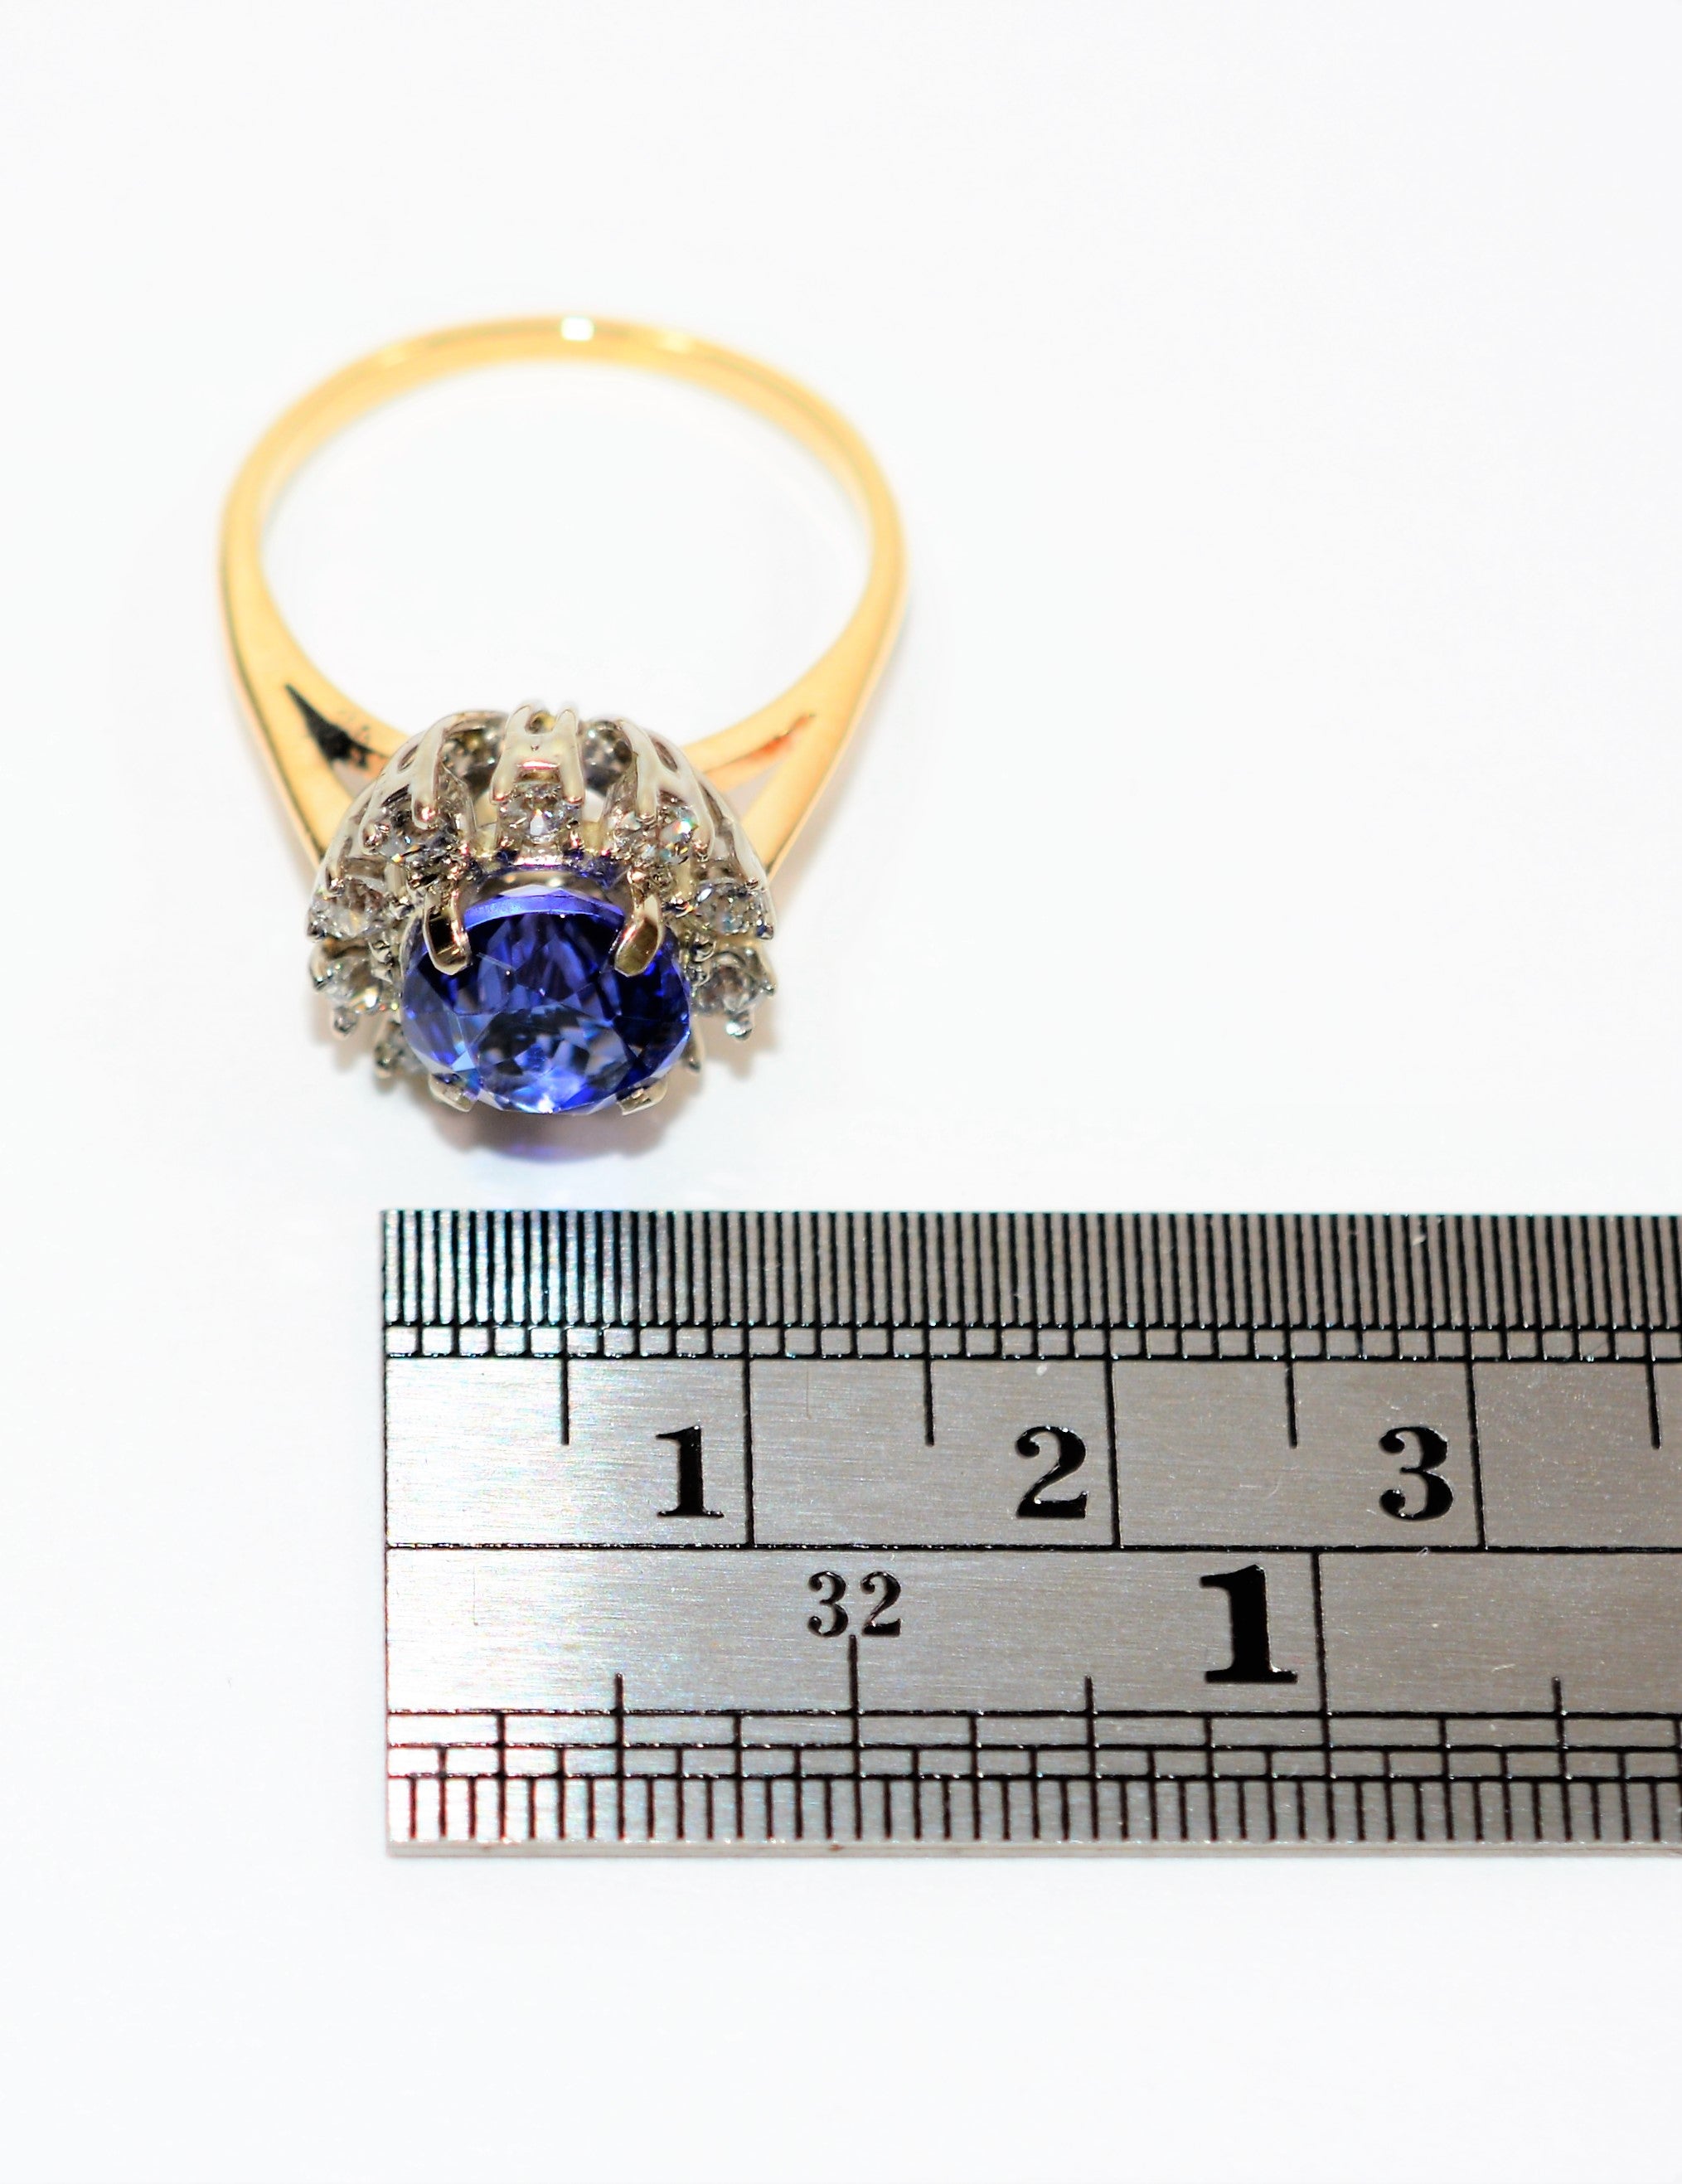 Certified Natural D'Block Tanzanite & Diamond Ring 14K Solid Gold 2.92tcw Engagement Ring Statement Ring Cocktail Ring Womens Ring Jewellery